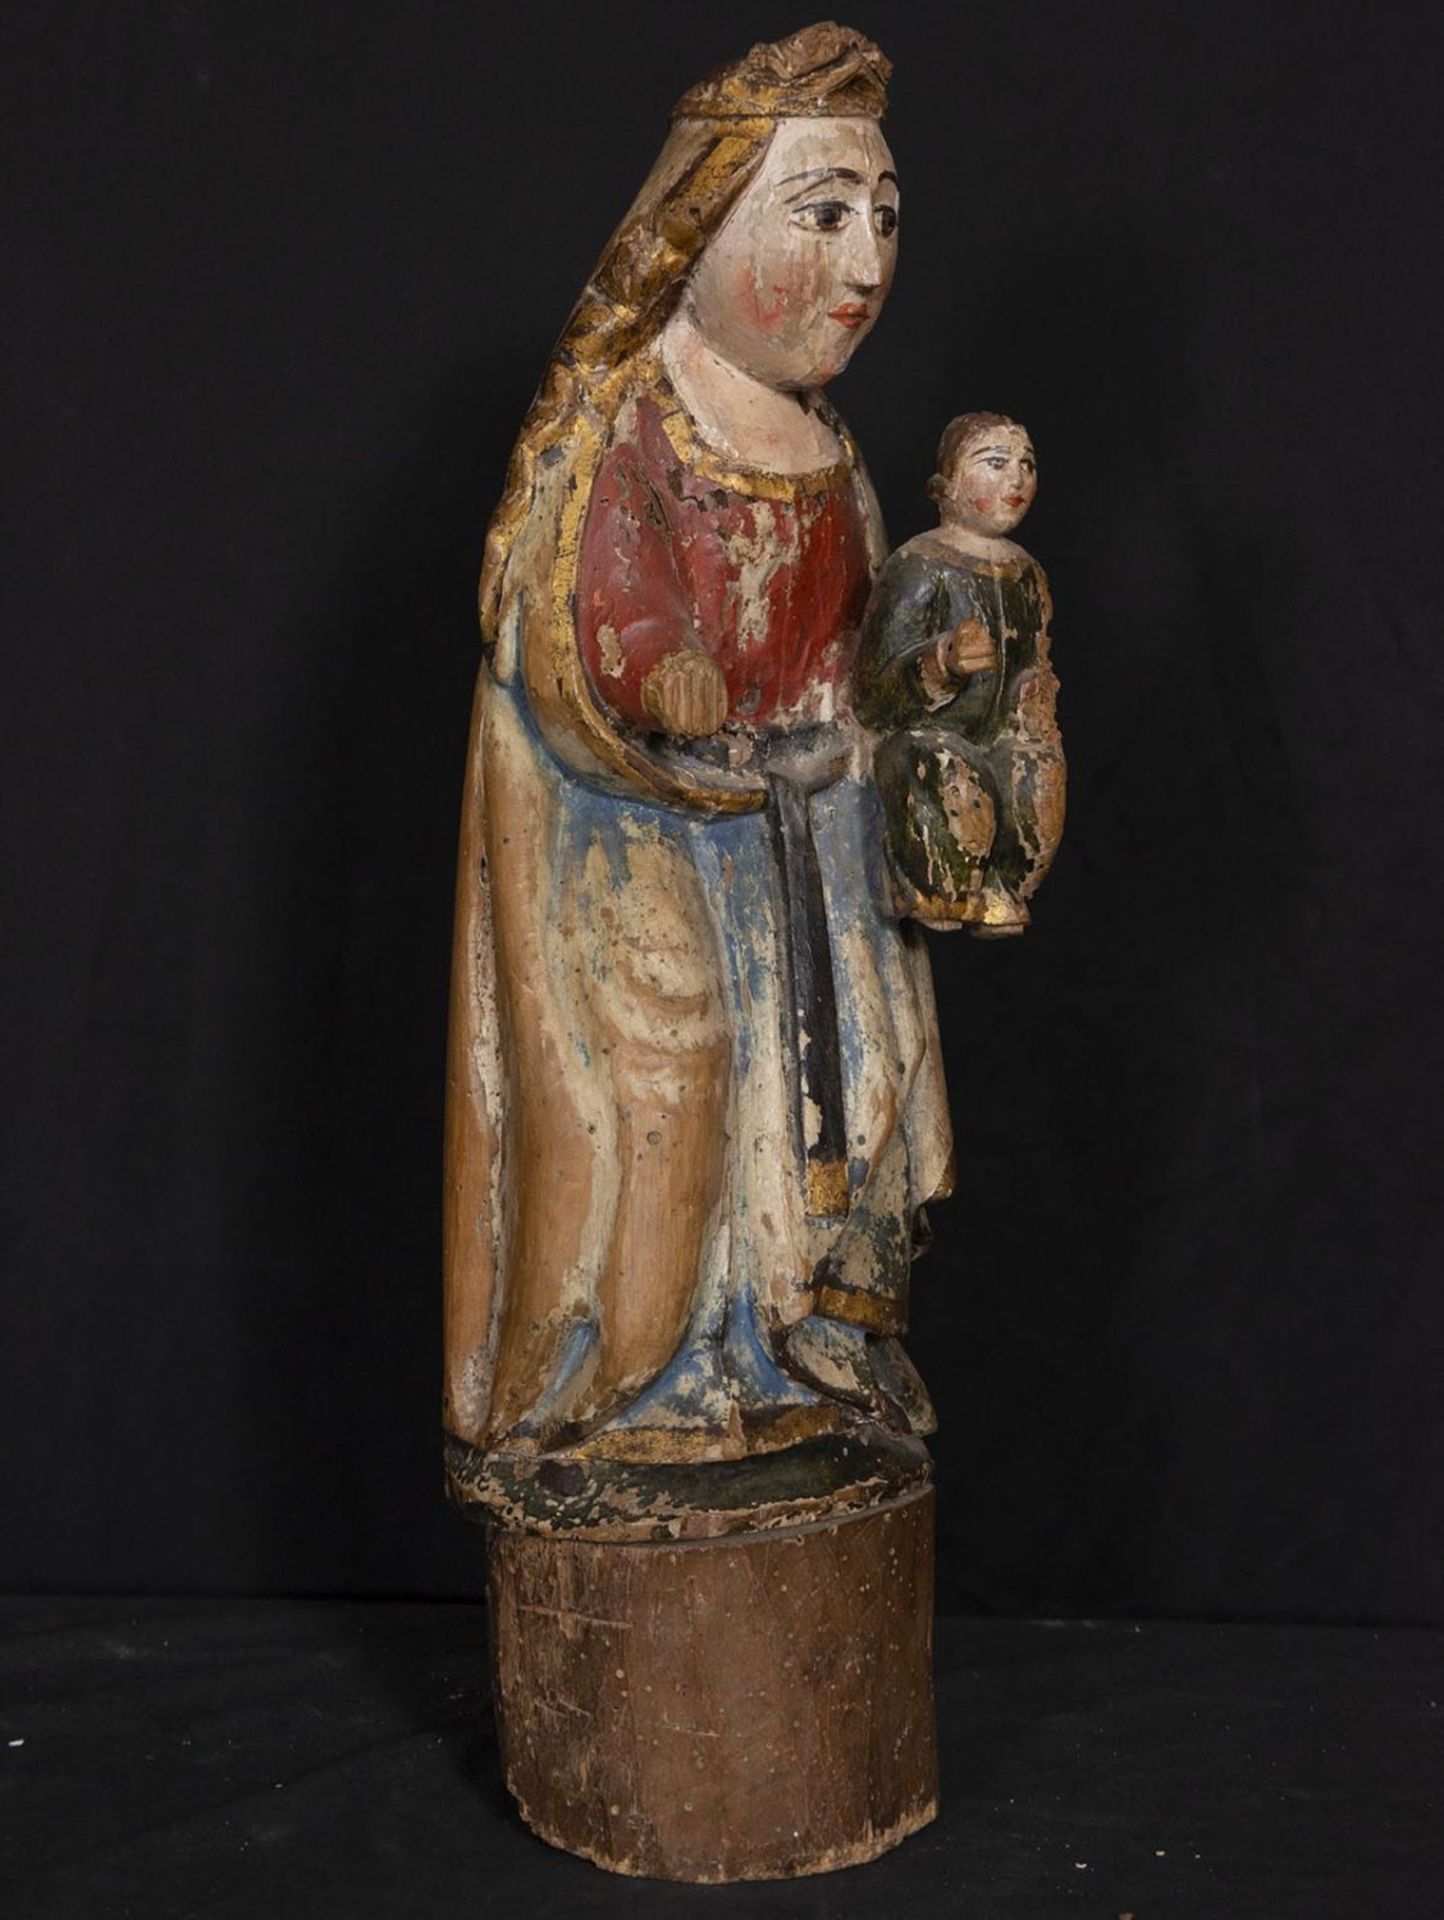 Virgin and Child Late Romanesque Portuguese or Galician from the late 14th century - early 15th cent - Image 4 of 5